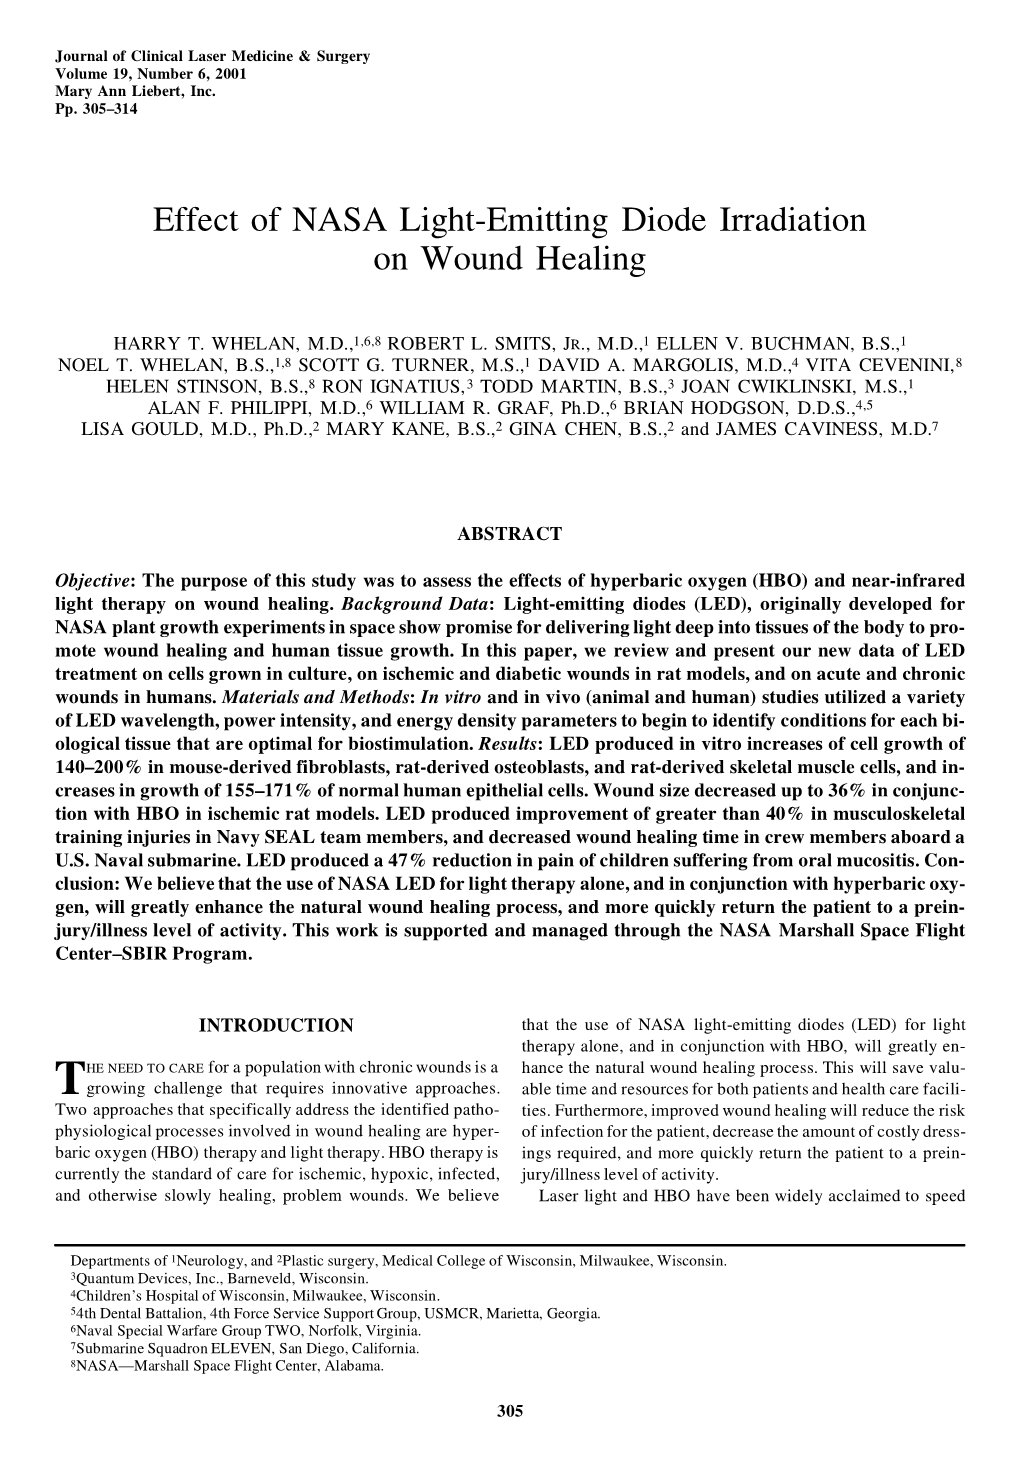 Effect of NASA Light-Emitting Diode Irradiation on Wound Healing